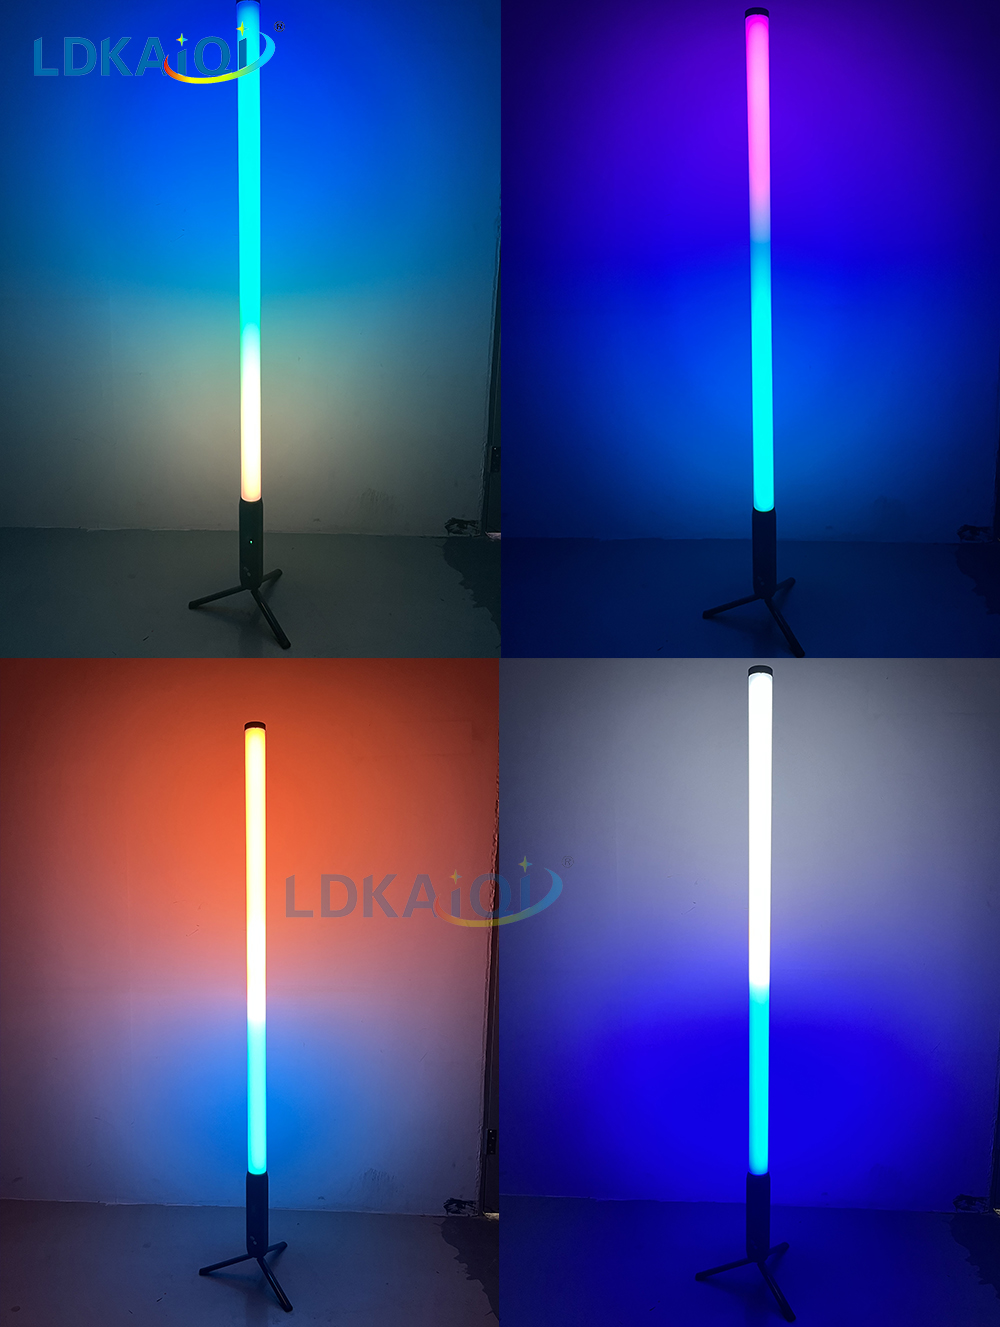 LED Tube Pixel Light 360 degrees Waterproof battery wireless remote and App control (图3)